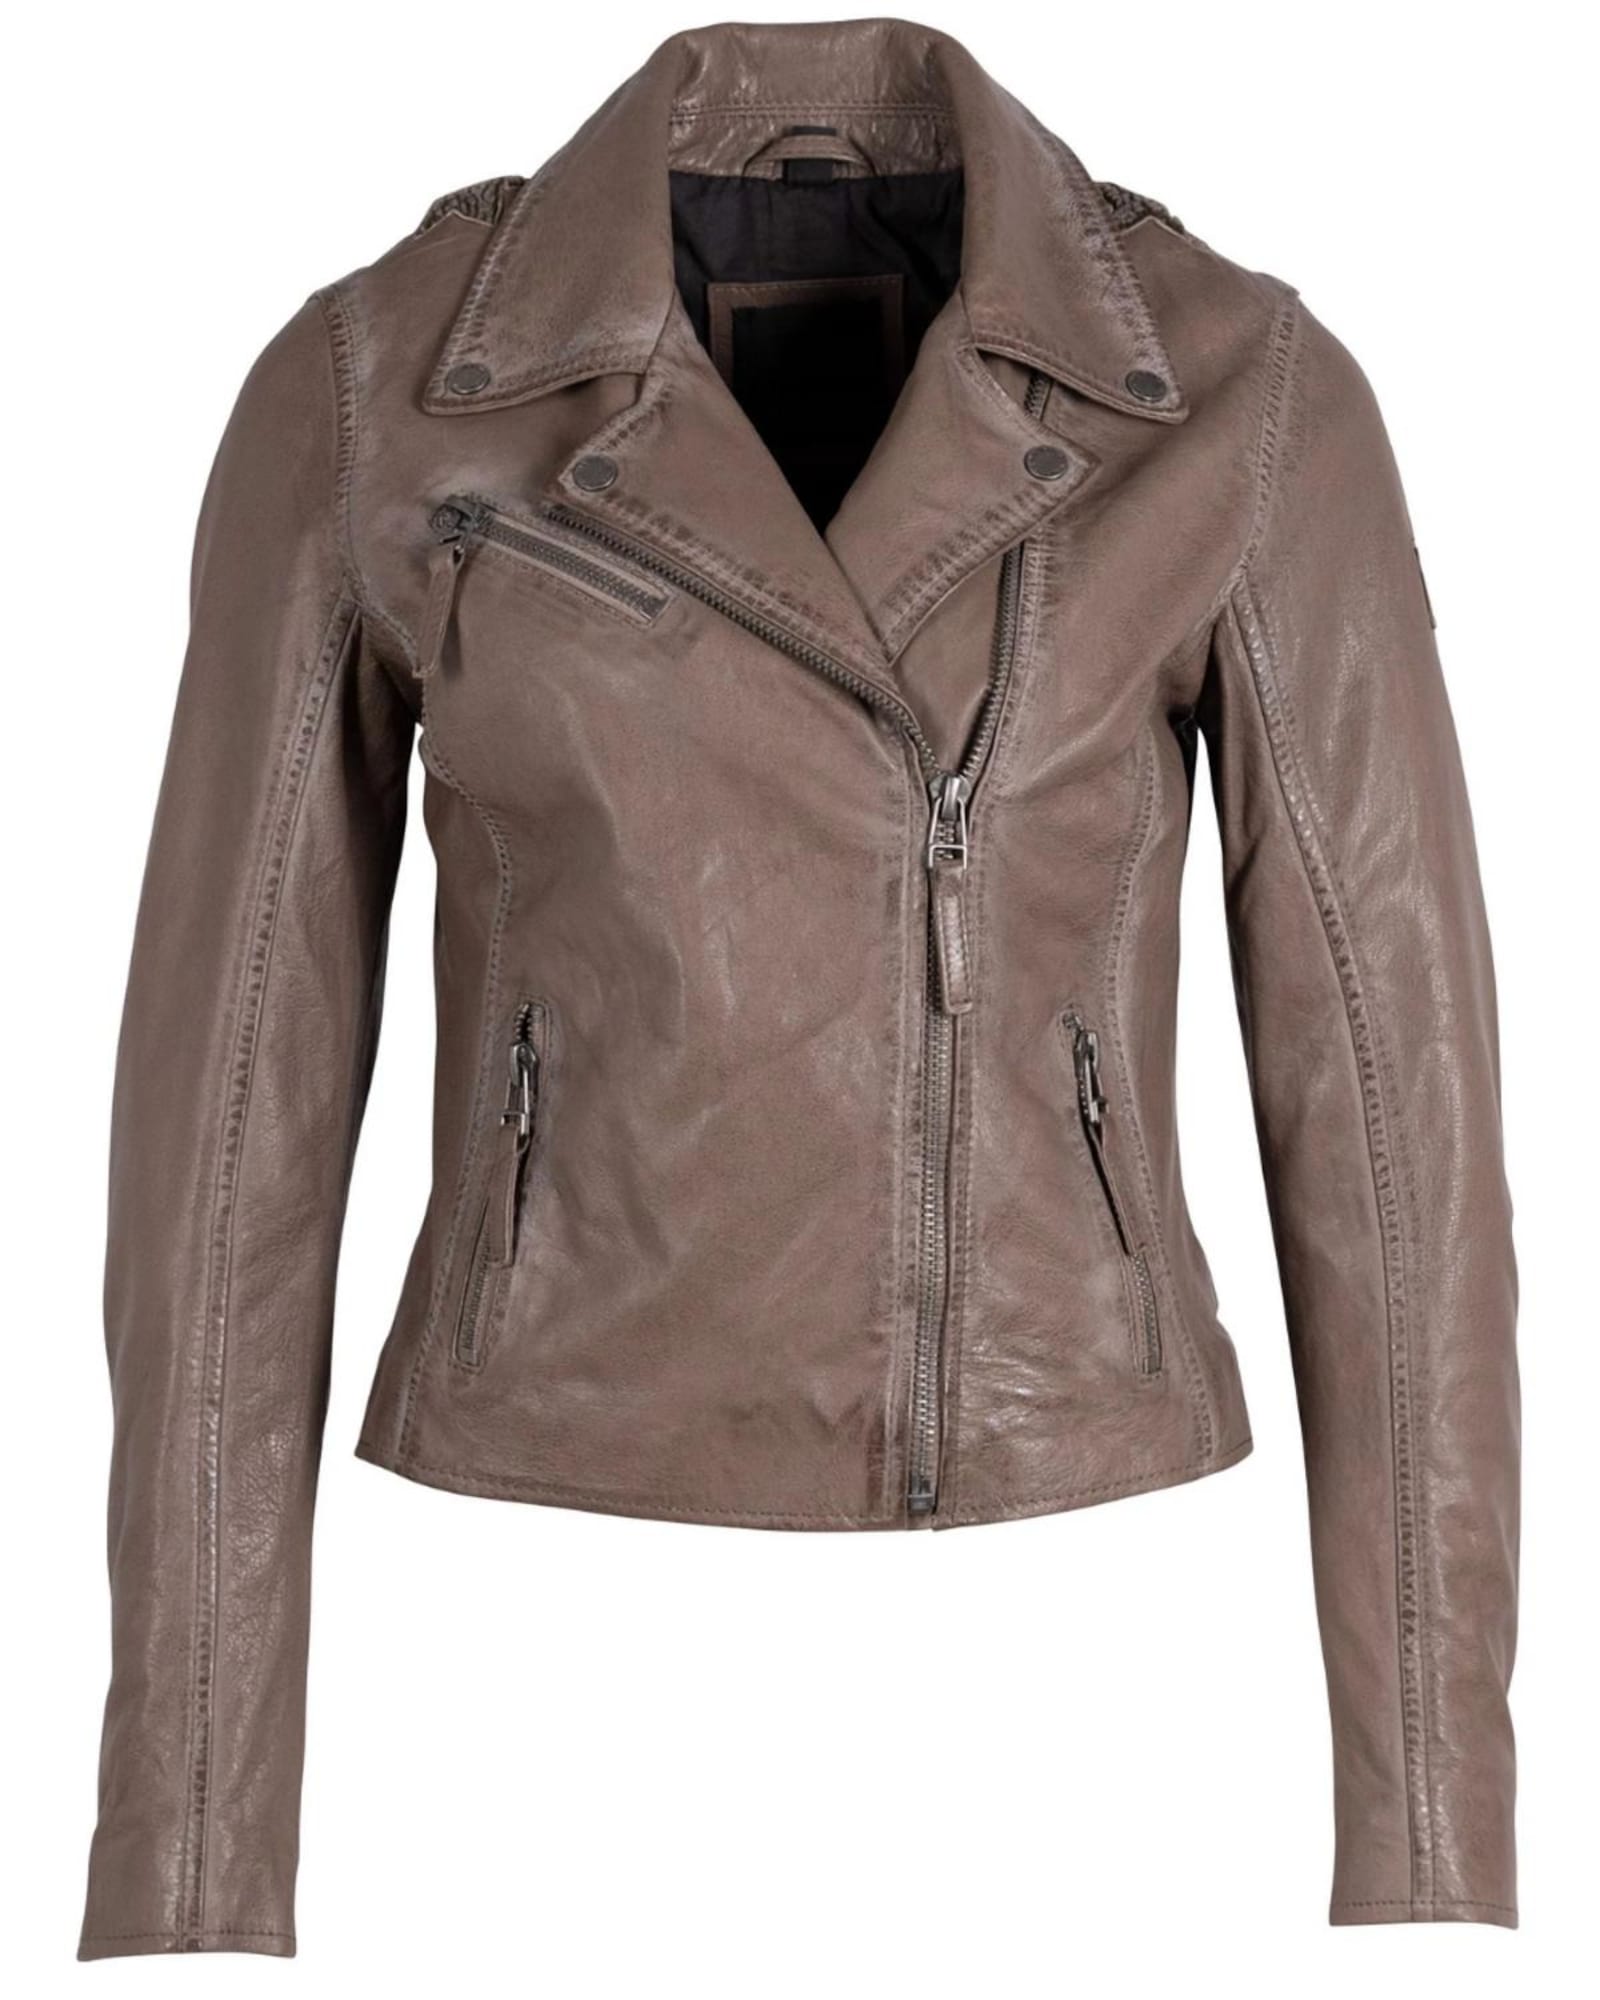 Christy Rf Leather Jacket in Taupe | Taupe